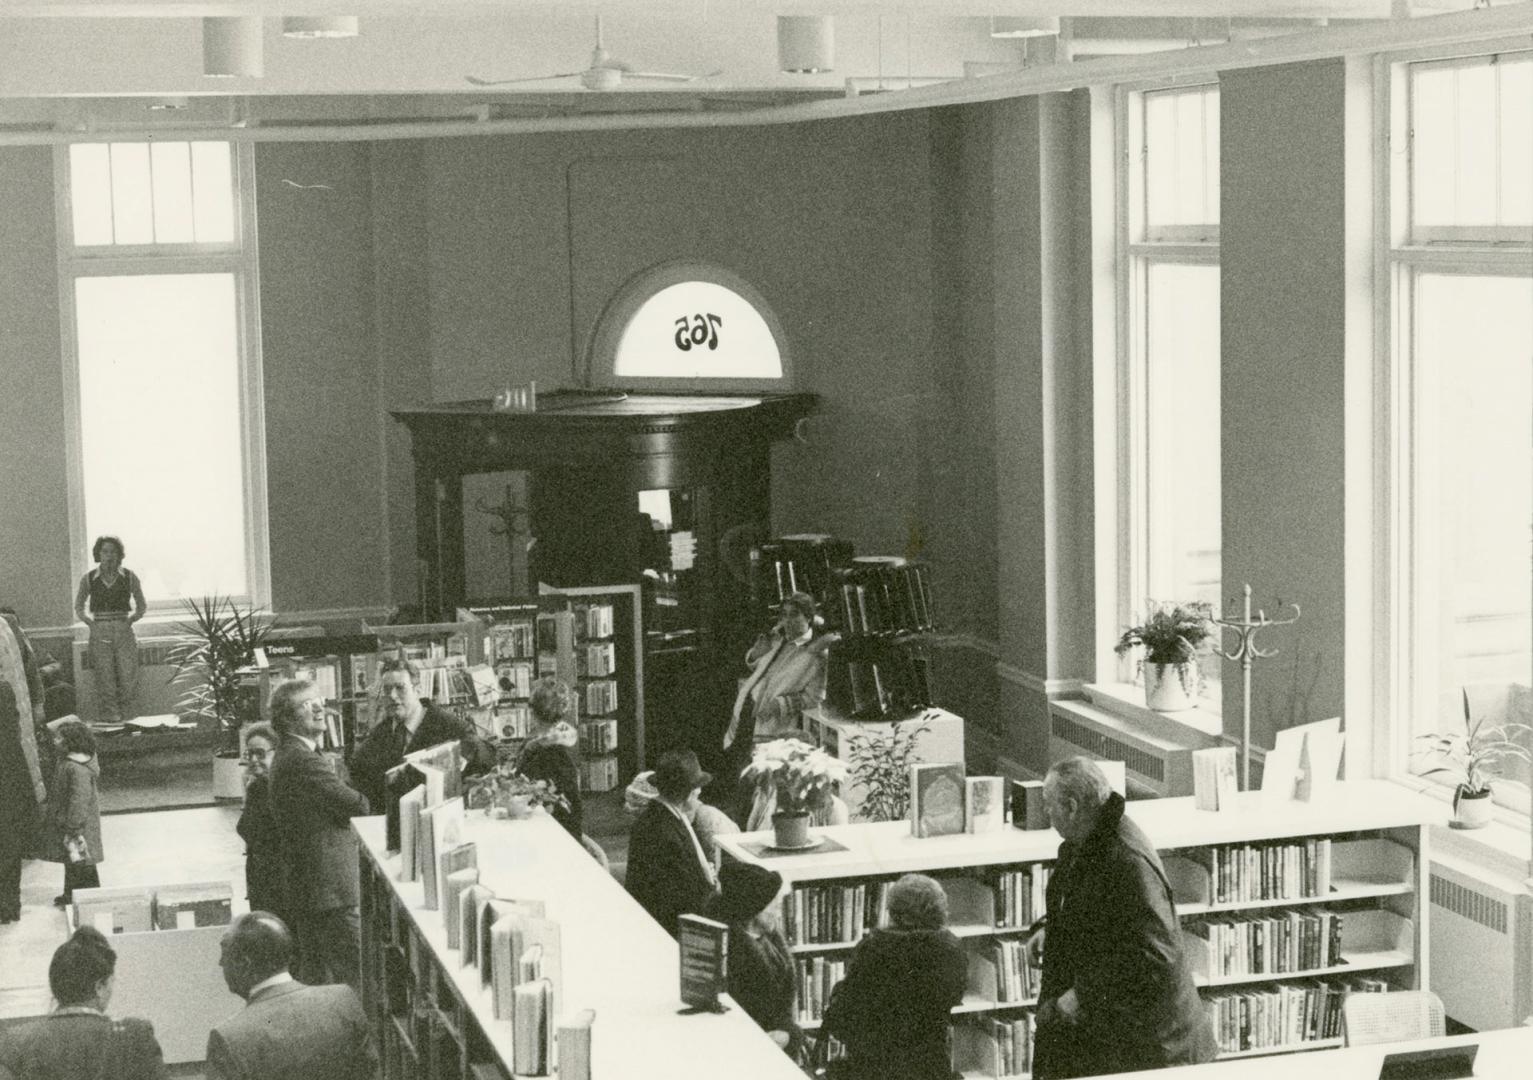 Picture of interior view of library branch showing crowd of people standing amongst shelves. 